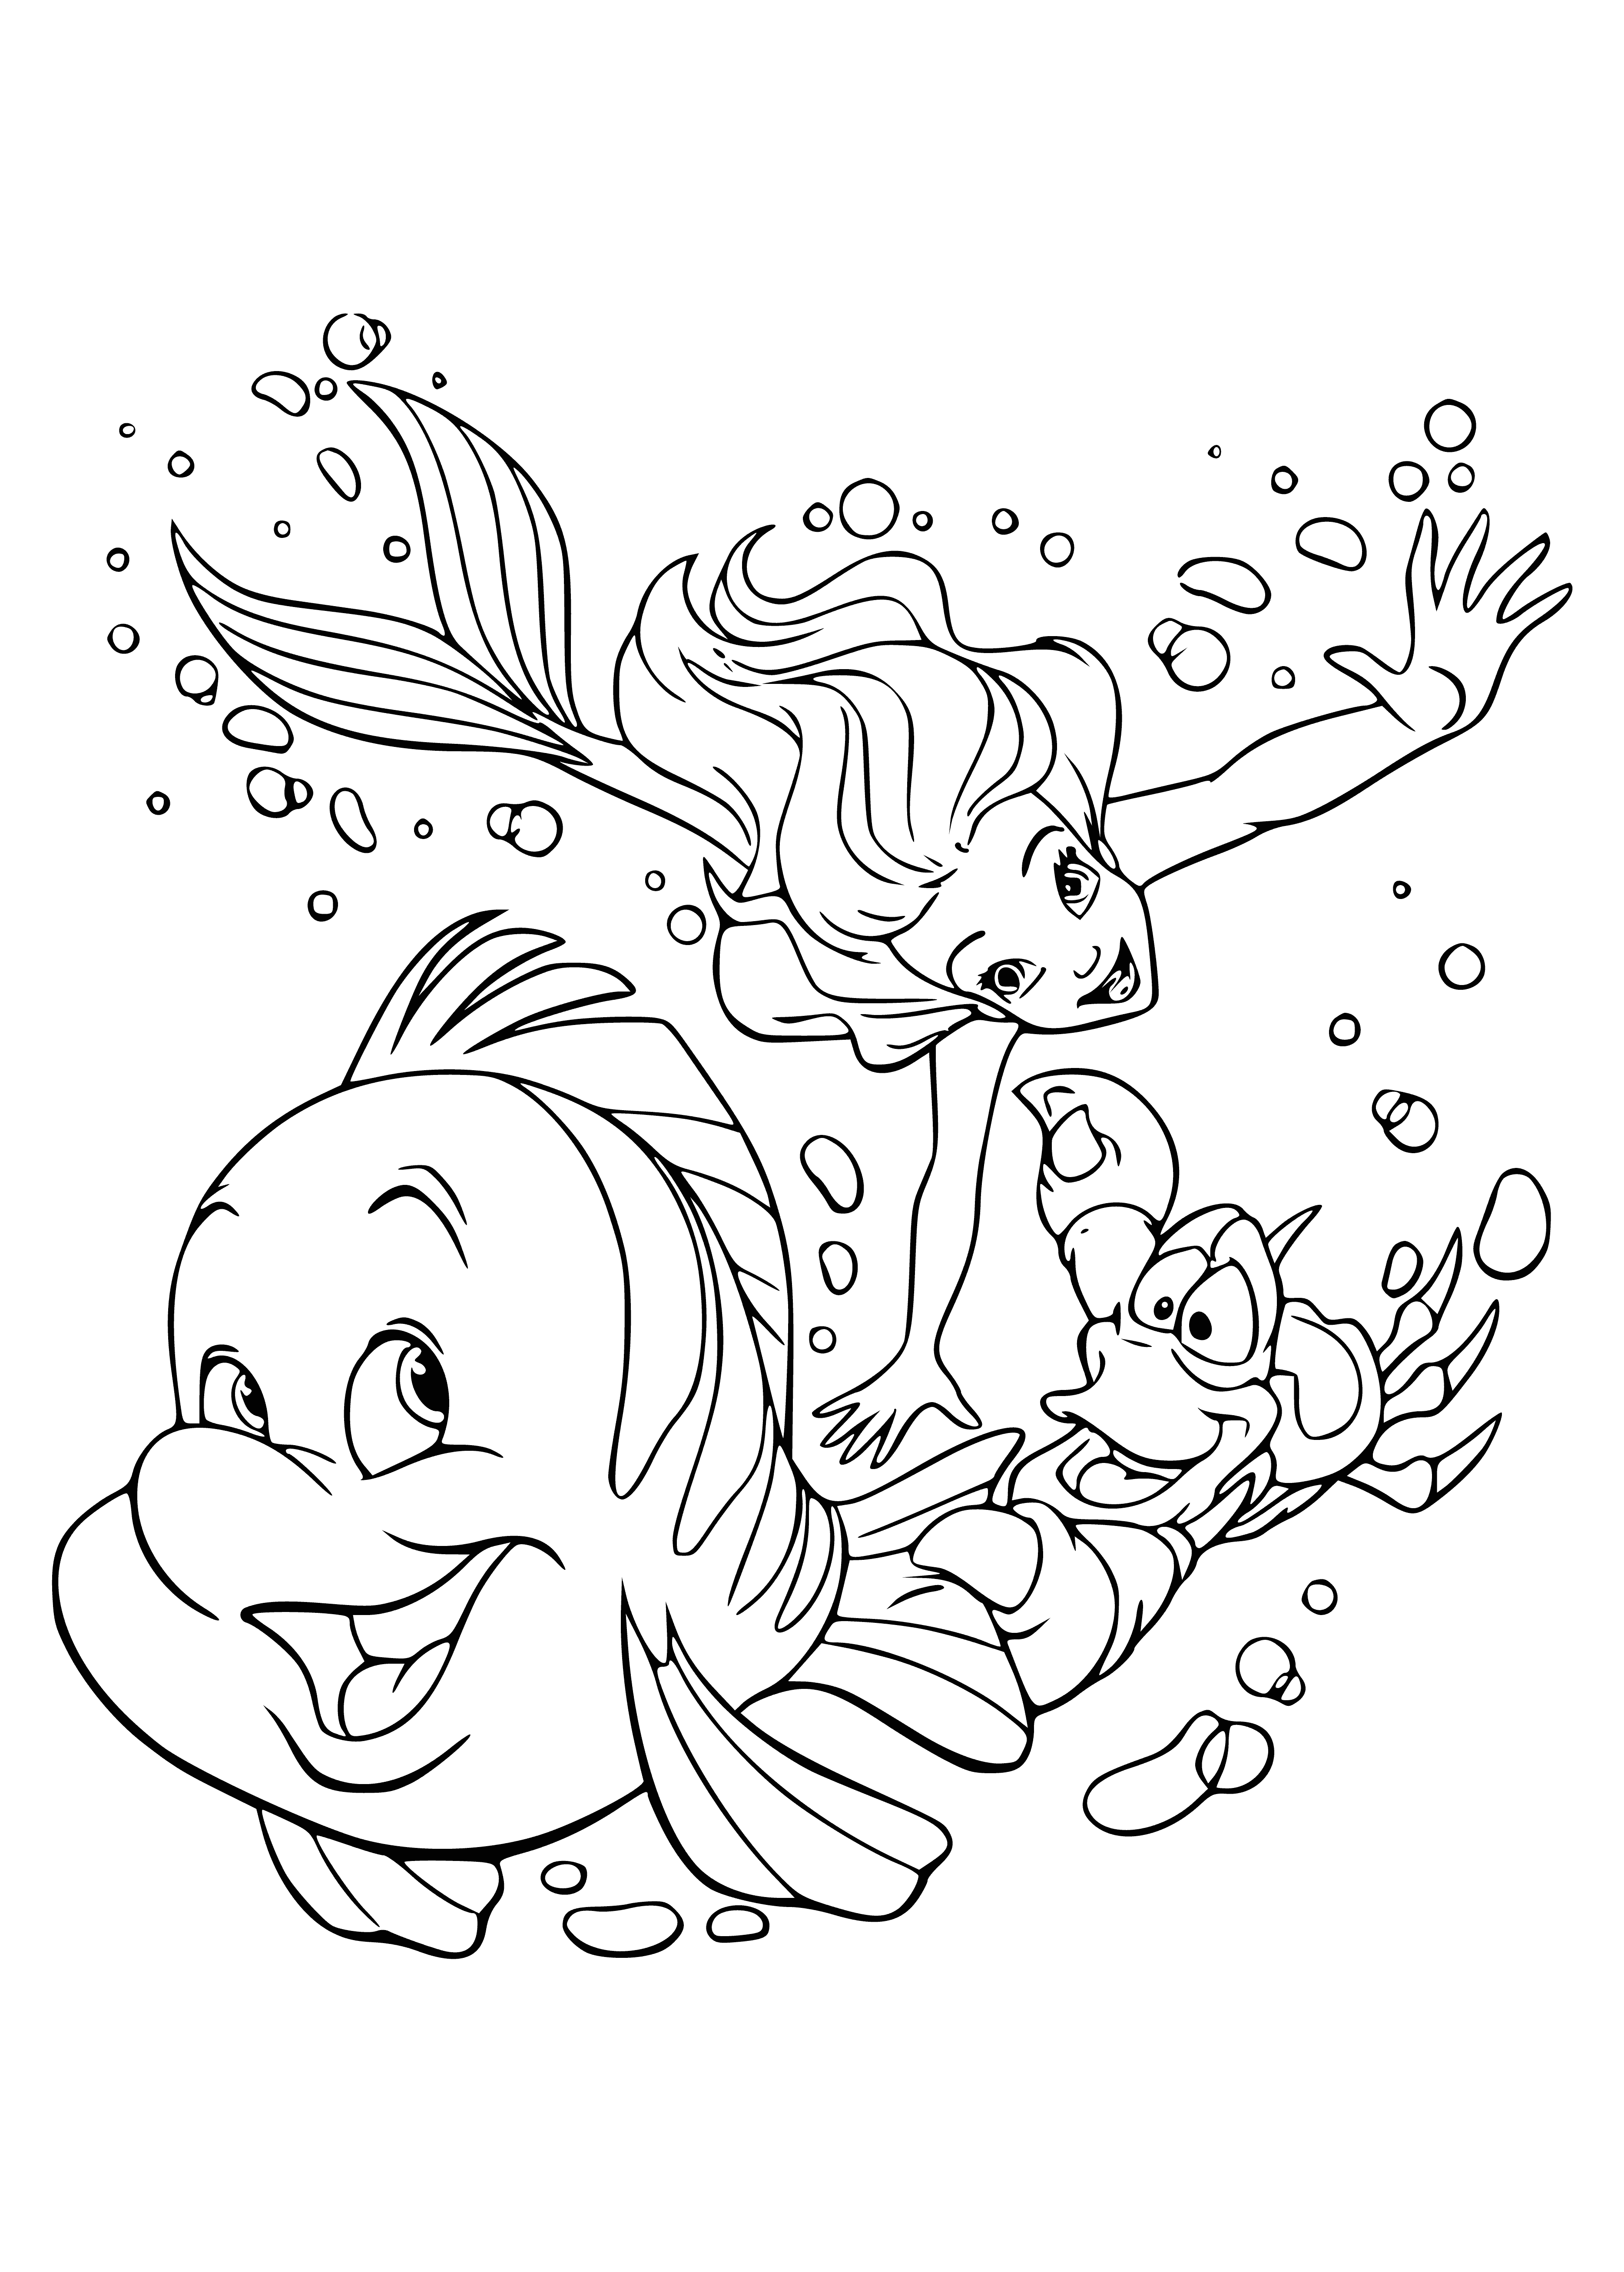 Flounder, Little Mermaid and Sebastian coloring page